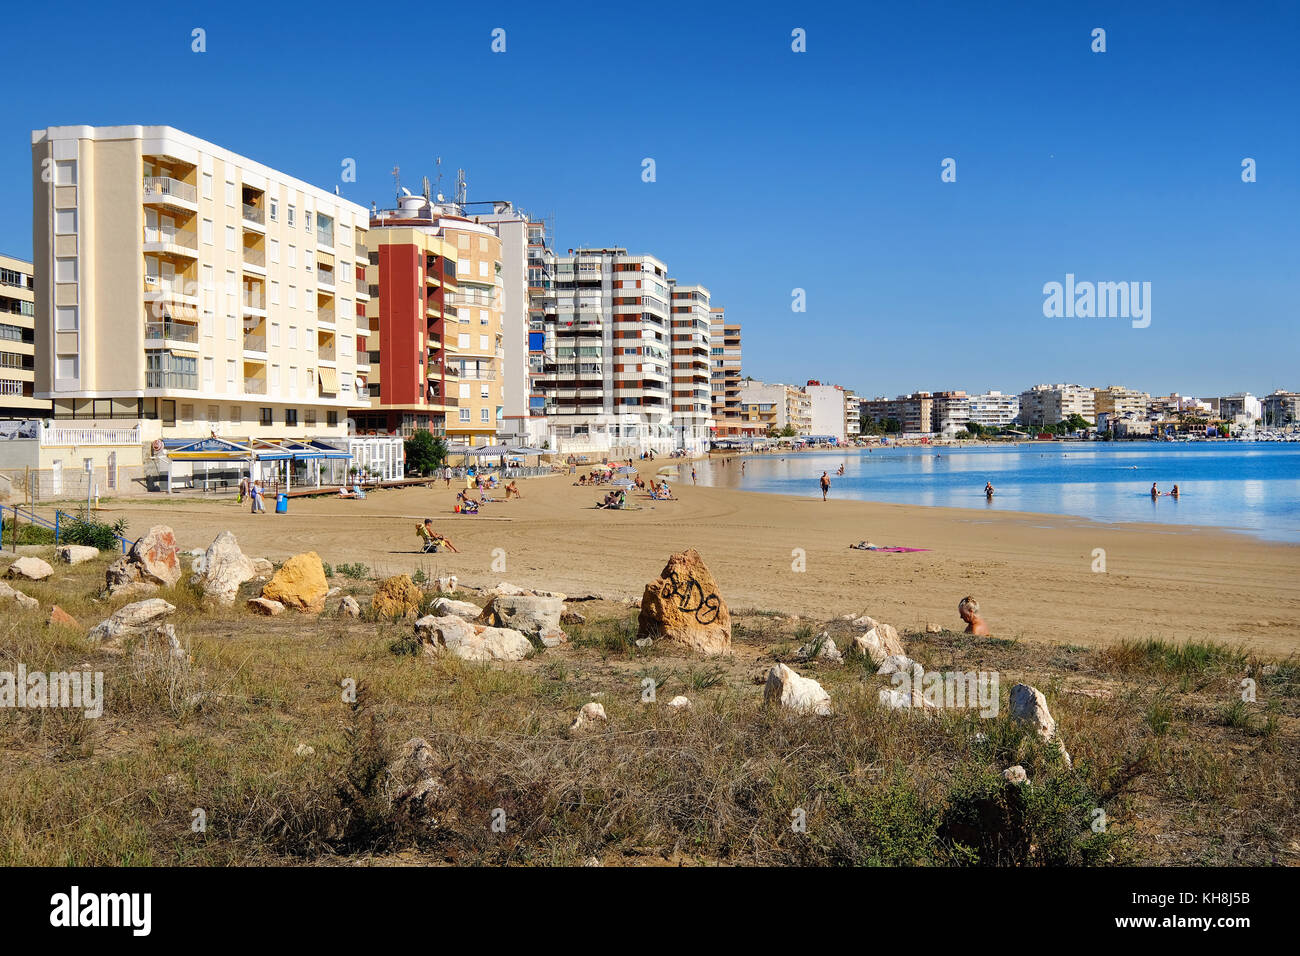 Torrevieja, Spain - October 20, 2017: Acequion beach in the Torrevieja resort city. Torrevieja is a Mediterranean city, popular travel destination for Stock Photo